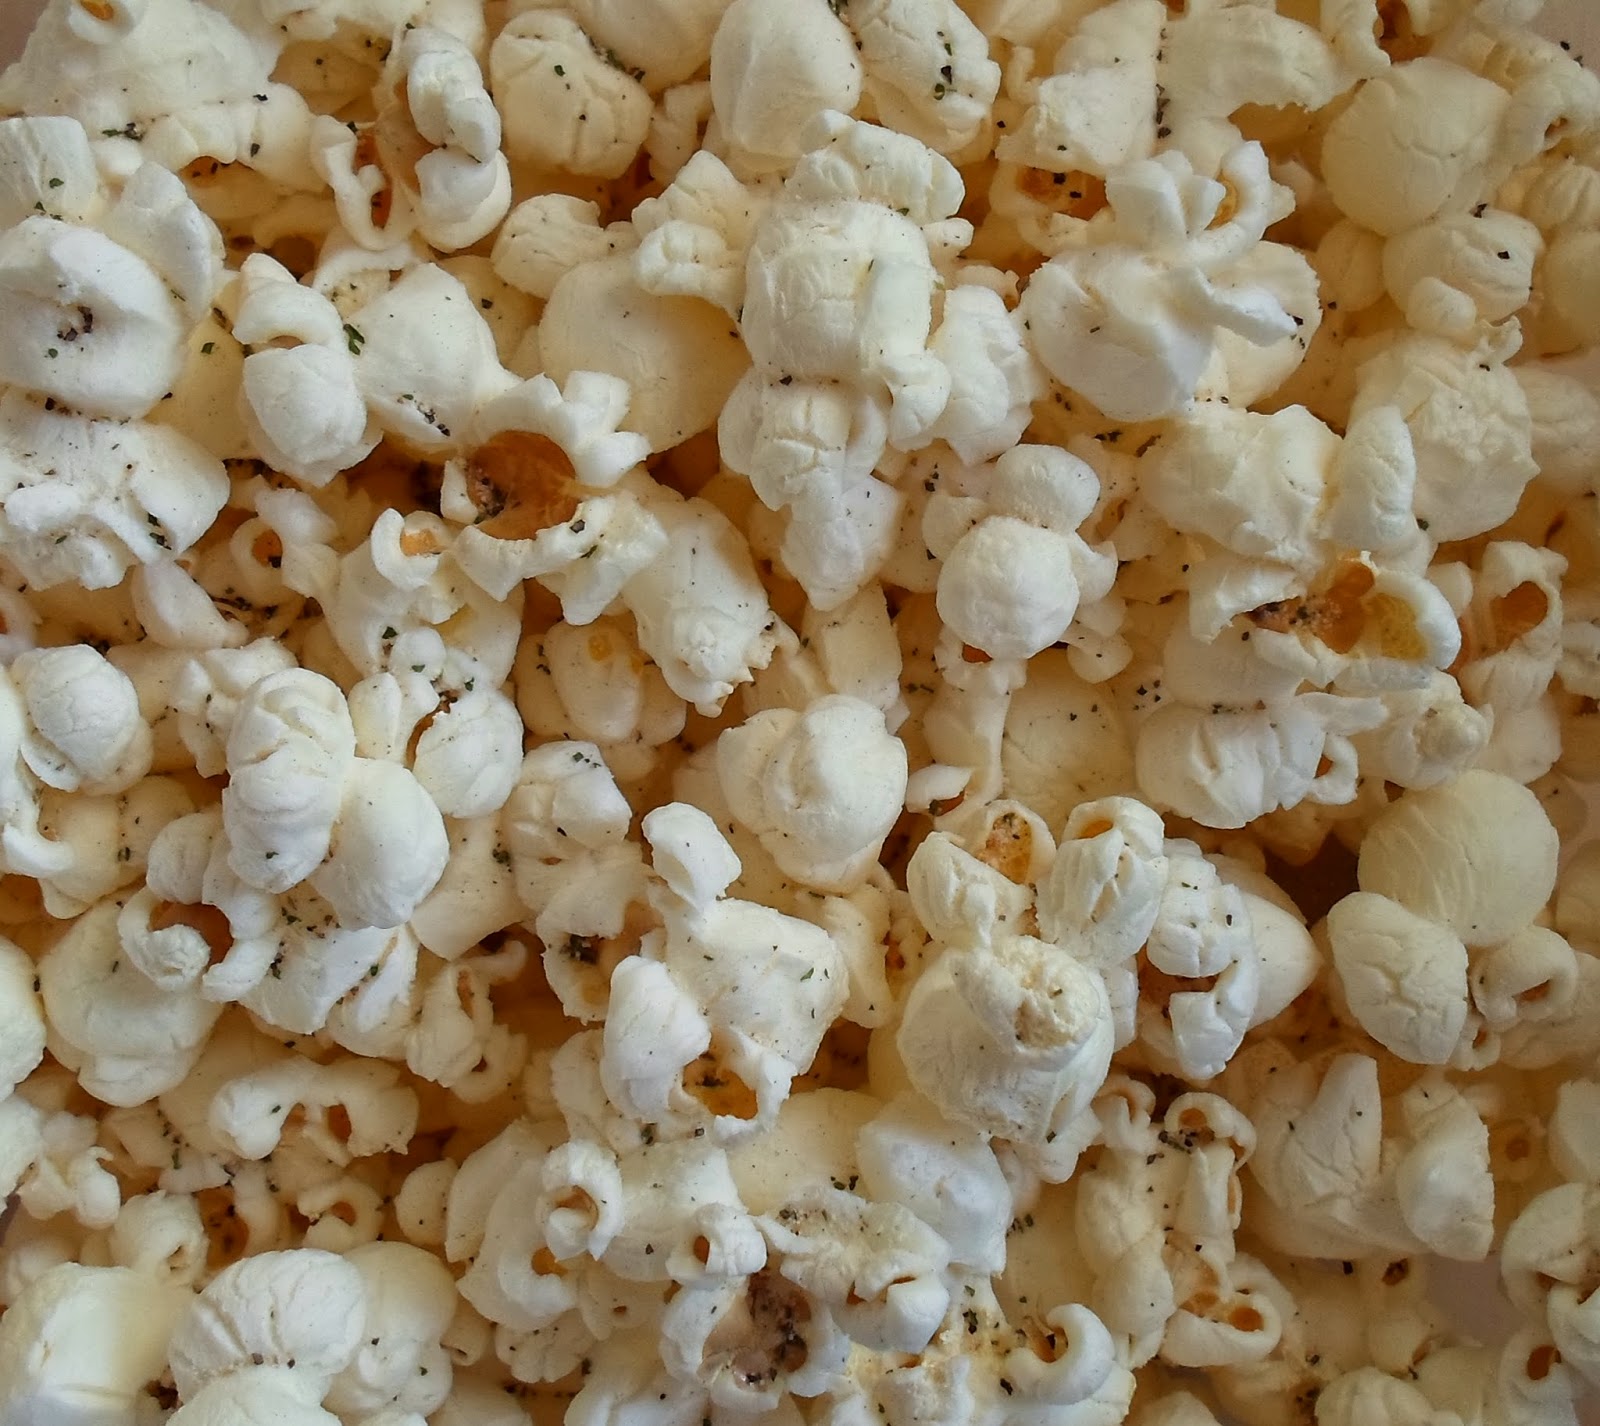 Happier Than A Pig In Mud: Popcorn with Morton Nature's Seasons